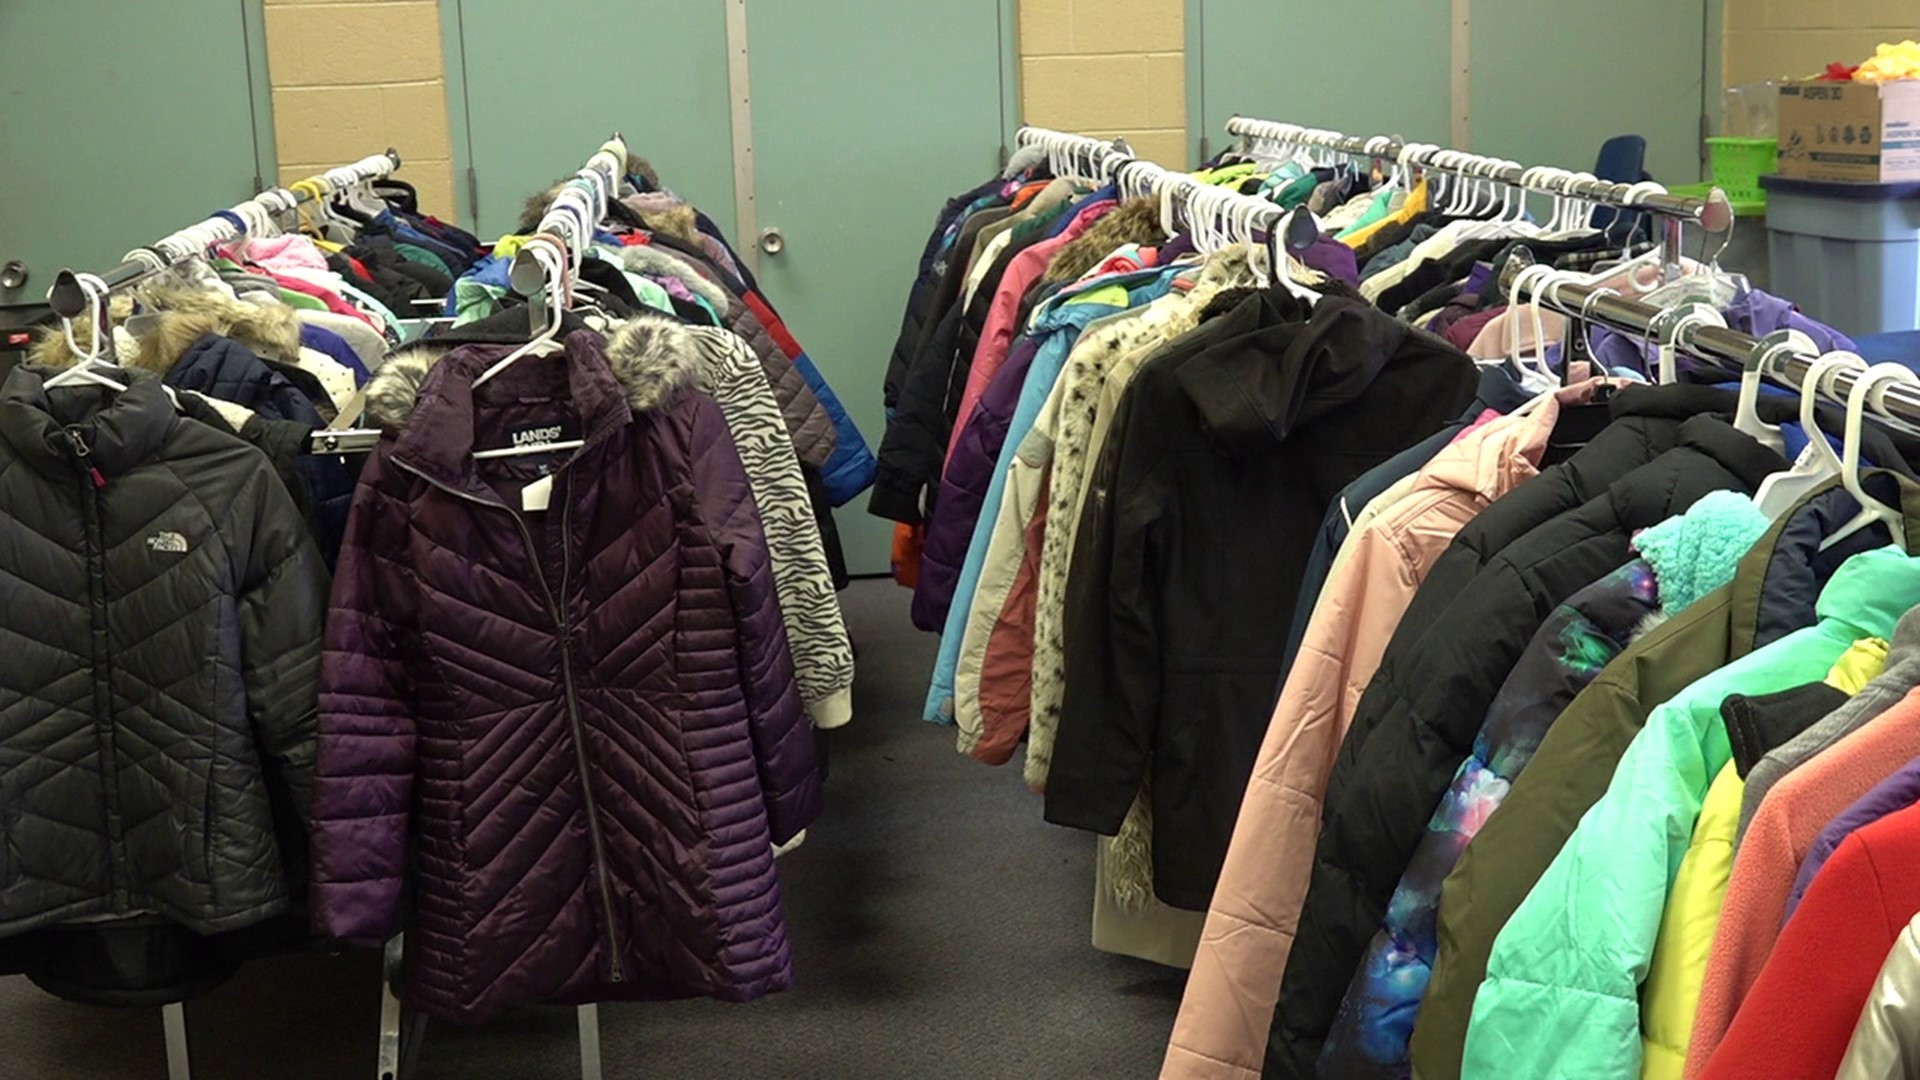 Winter coats and accessories were distributed Sunday afternoon at Saint Aloysius Church in Wilkes-Barre.